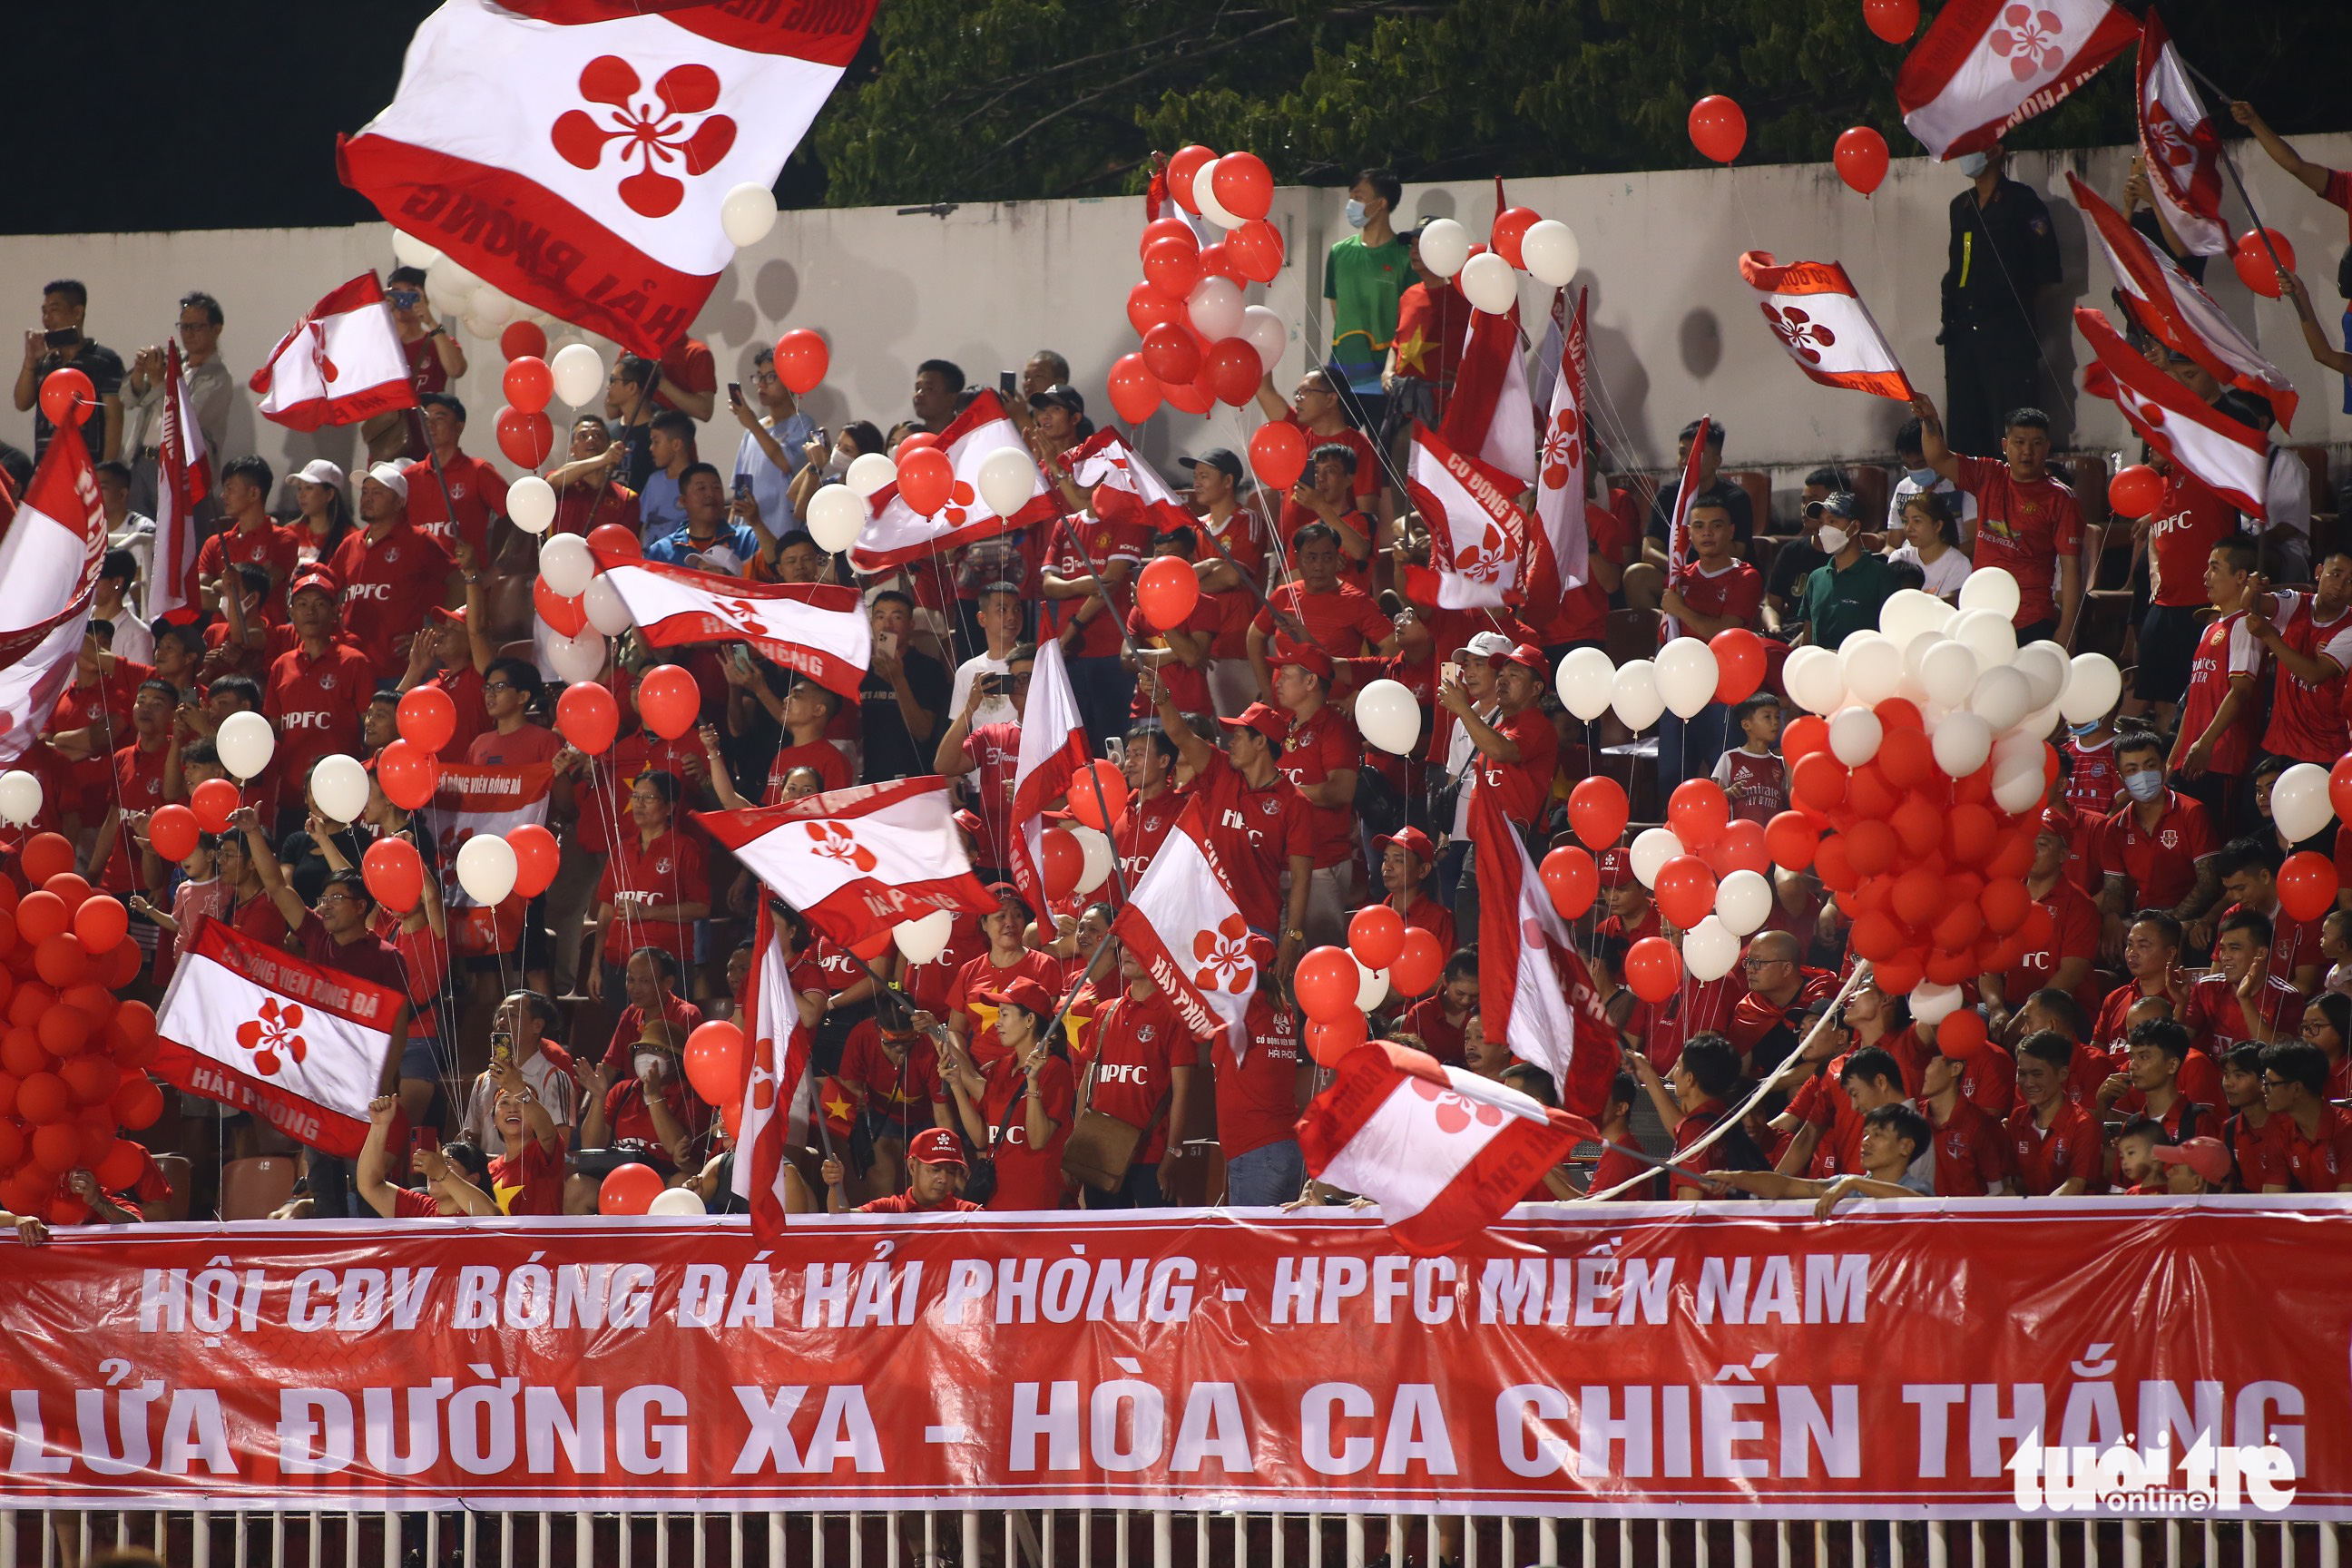 Supporters of Hai Phong football club bring balloons to cheer for their team in the game against Sai Gon in Round 22 of the 2022 V-League 1 at Thong Nhat Stadium in Ho Chi Minh City, October 28, 2022. Photo: H.T. / Tuoi Tre